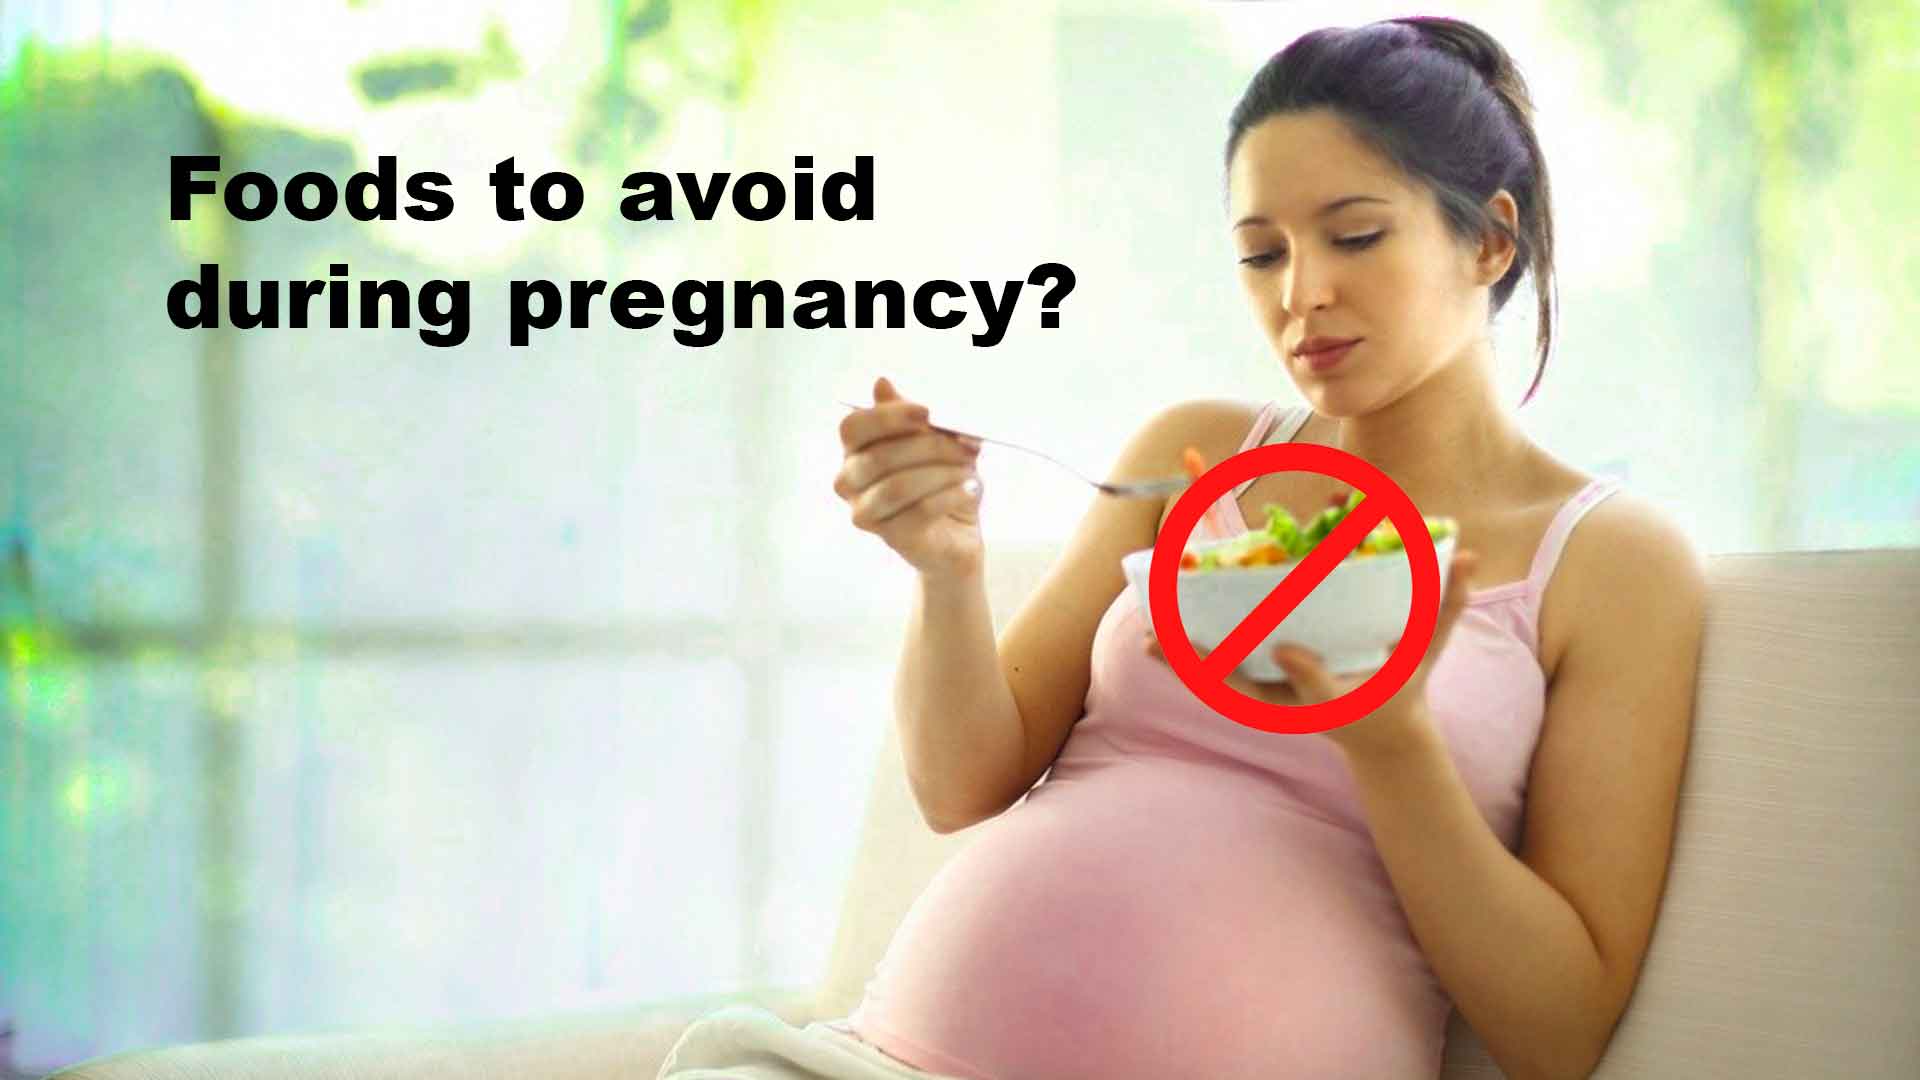 Which foods to avoid during pregnancy